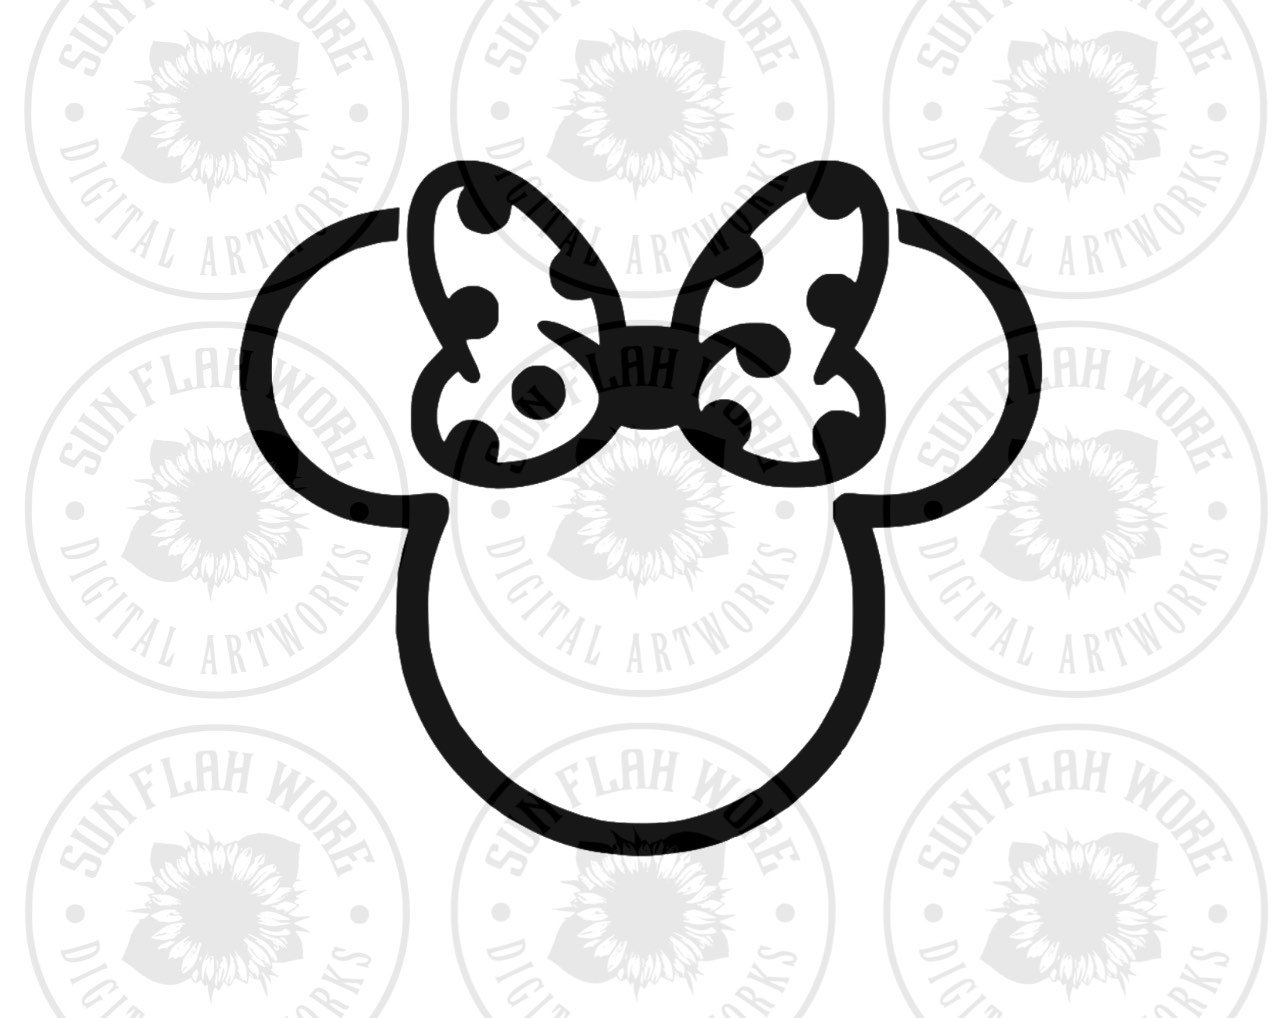 Minnie Mouse SVG Vector